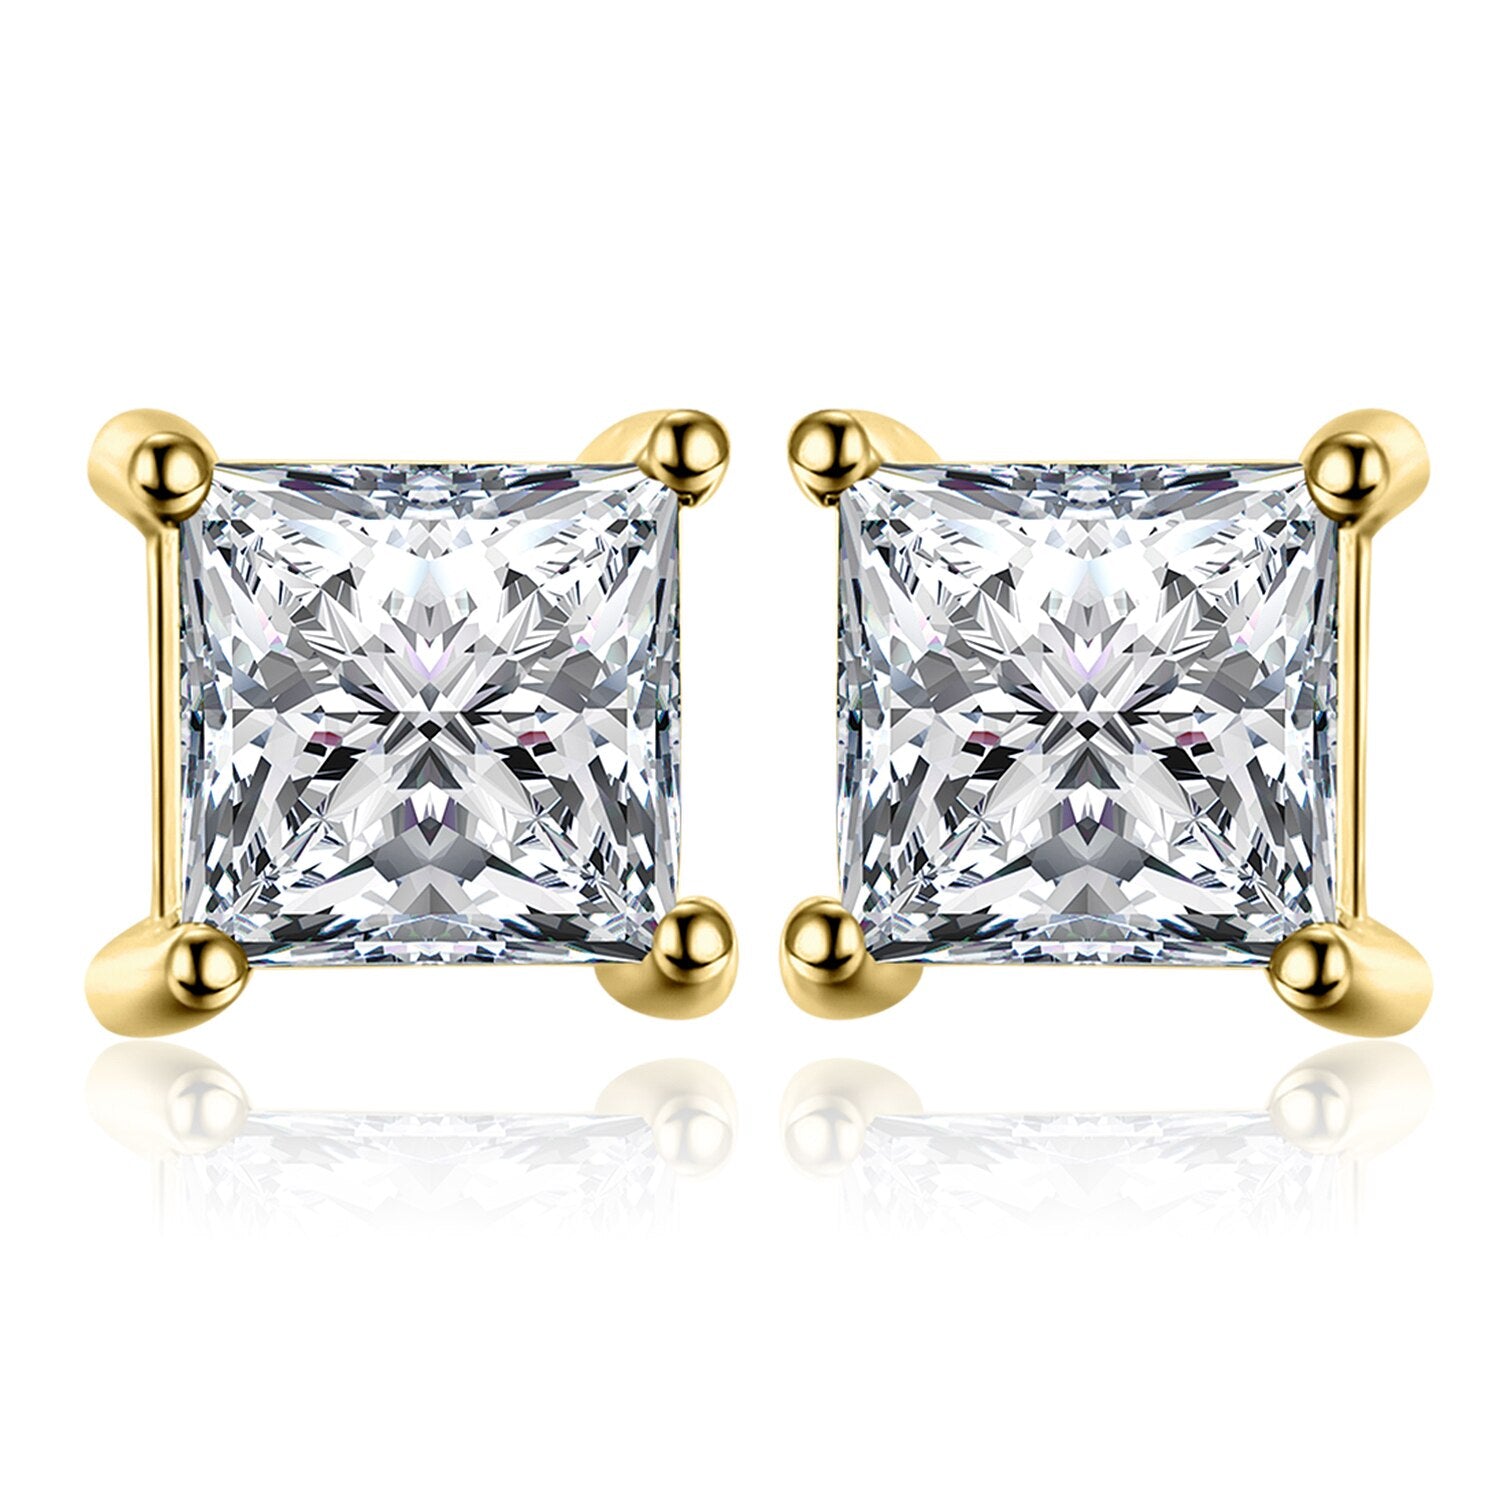 JewelryPalace Moissanite D Color Total 0.8ct Princess Cut S925 Sterling Silver Stud Earrings for Woman Yellow Rose Gold Plated